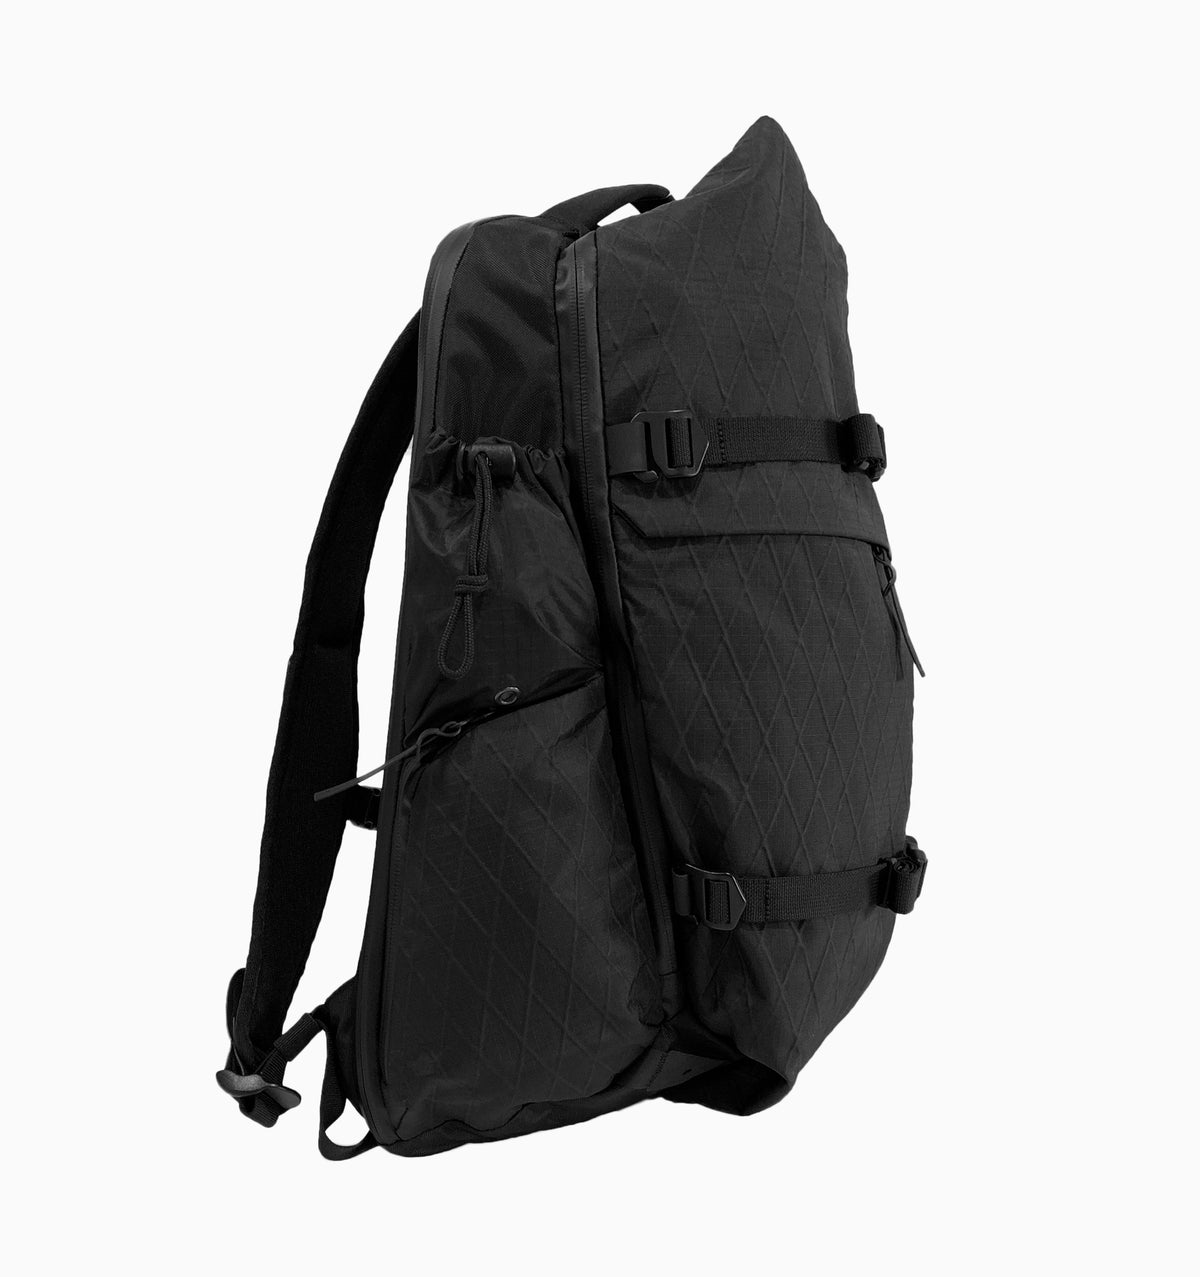 Code of Bell 16" X-Type Backpack 17L - Black